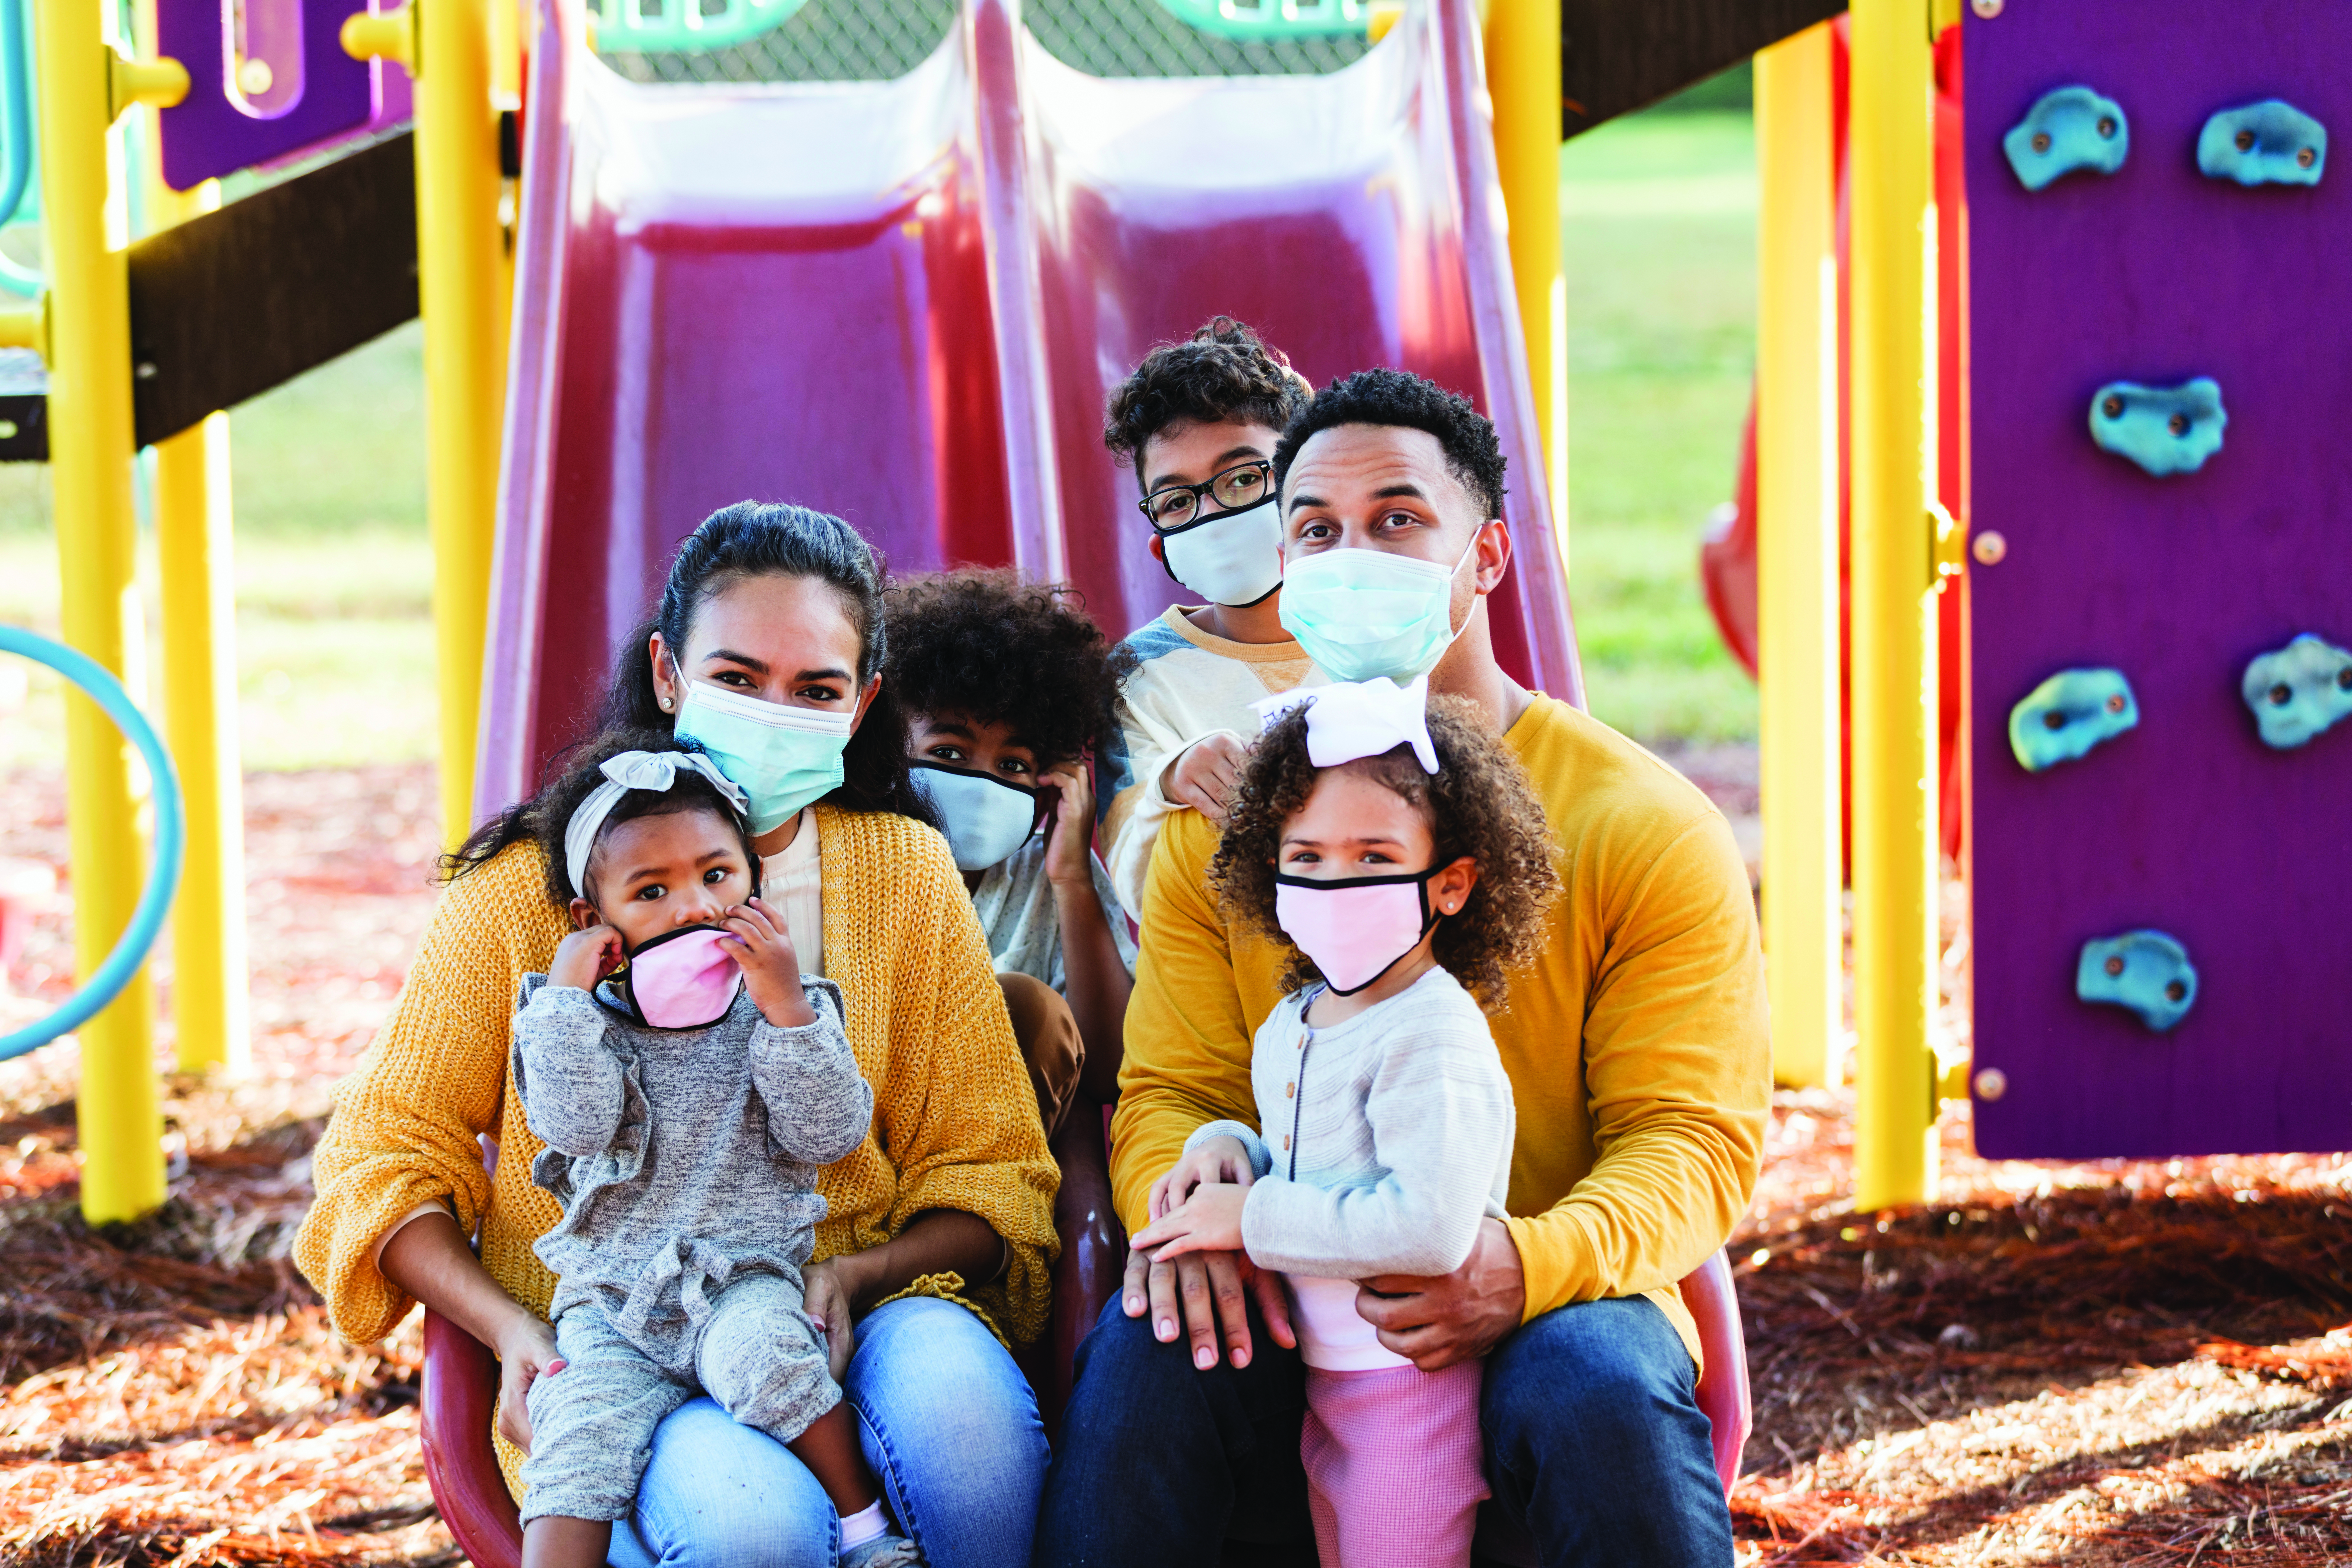 Family of 6 sits together at a playground in front of two red slides each wearing a mask